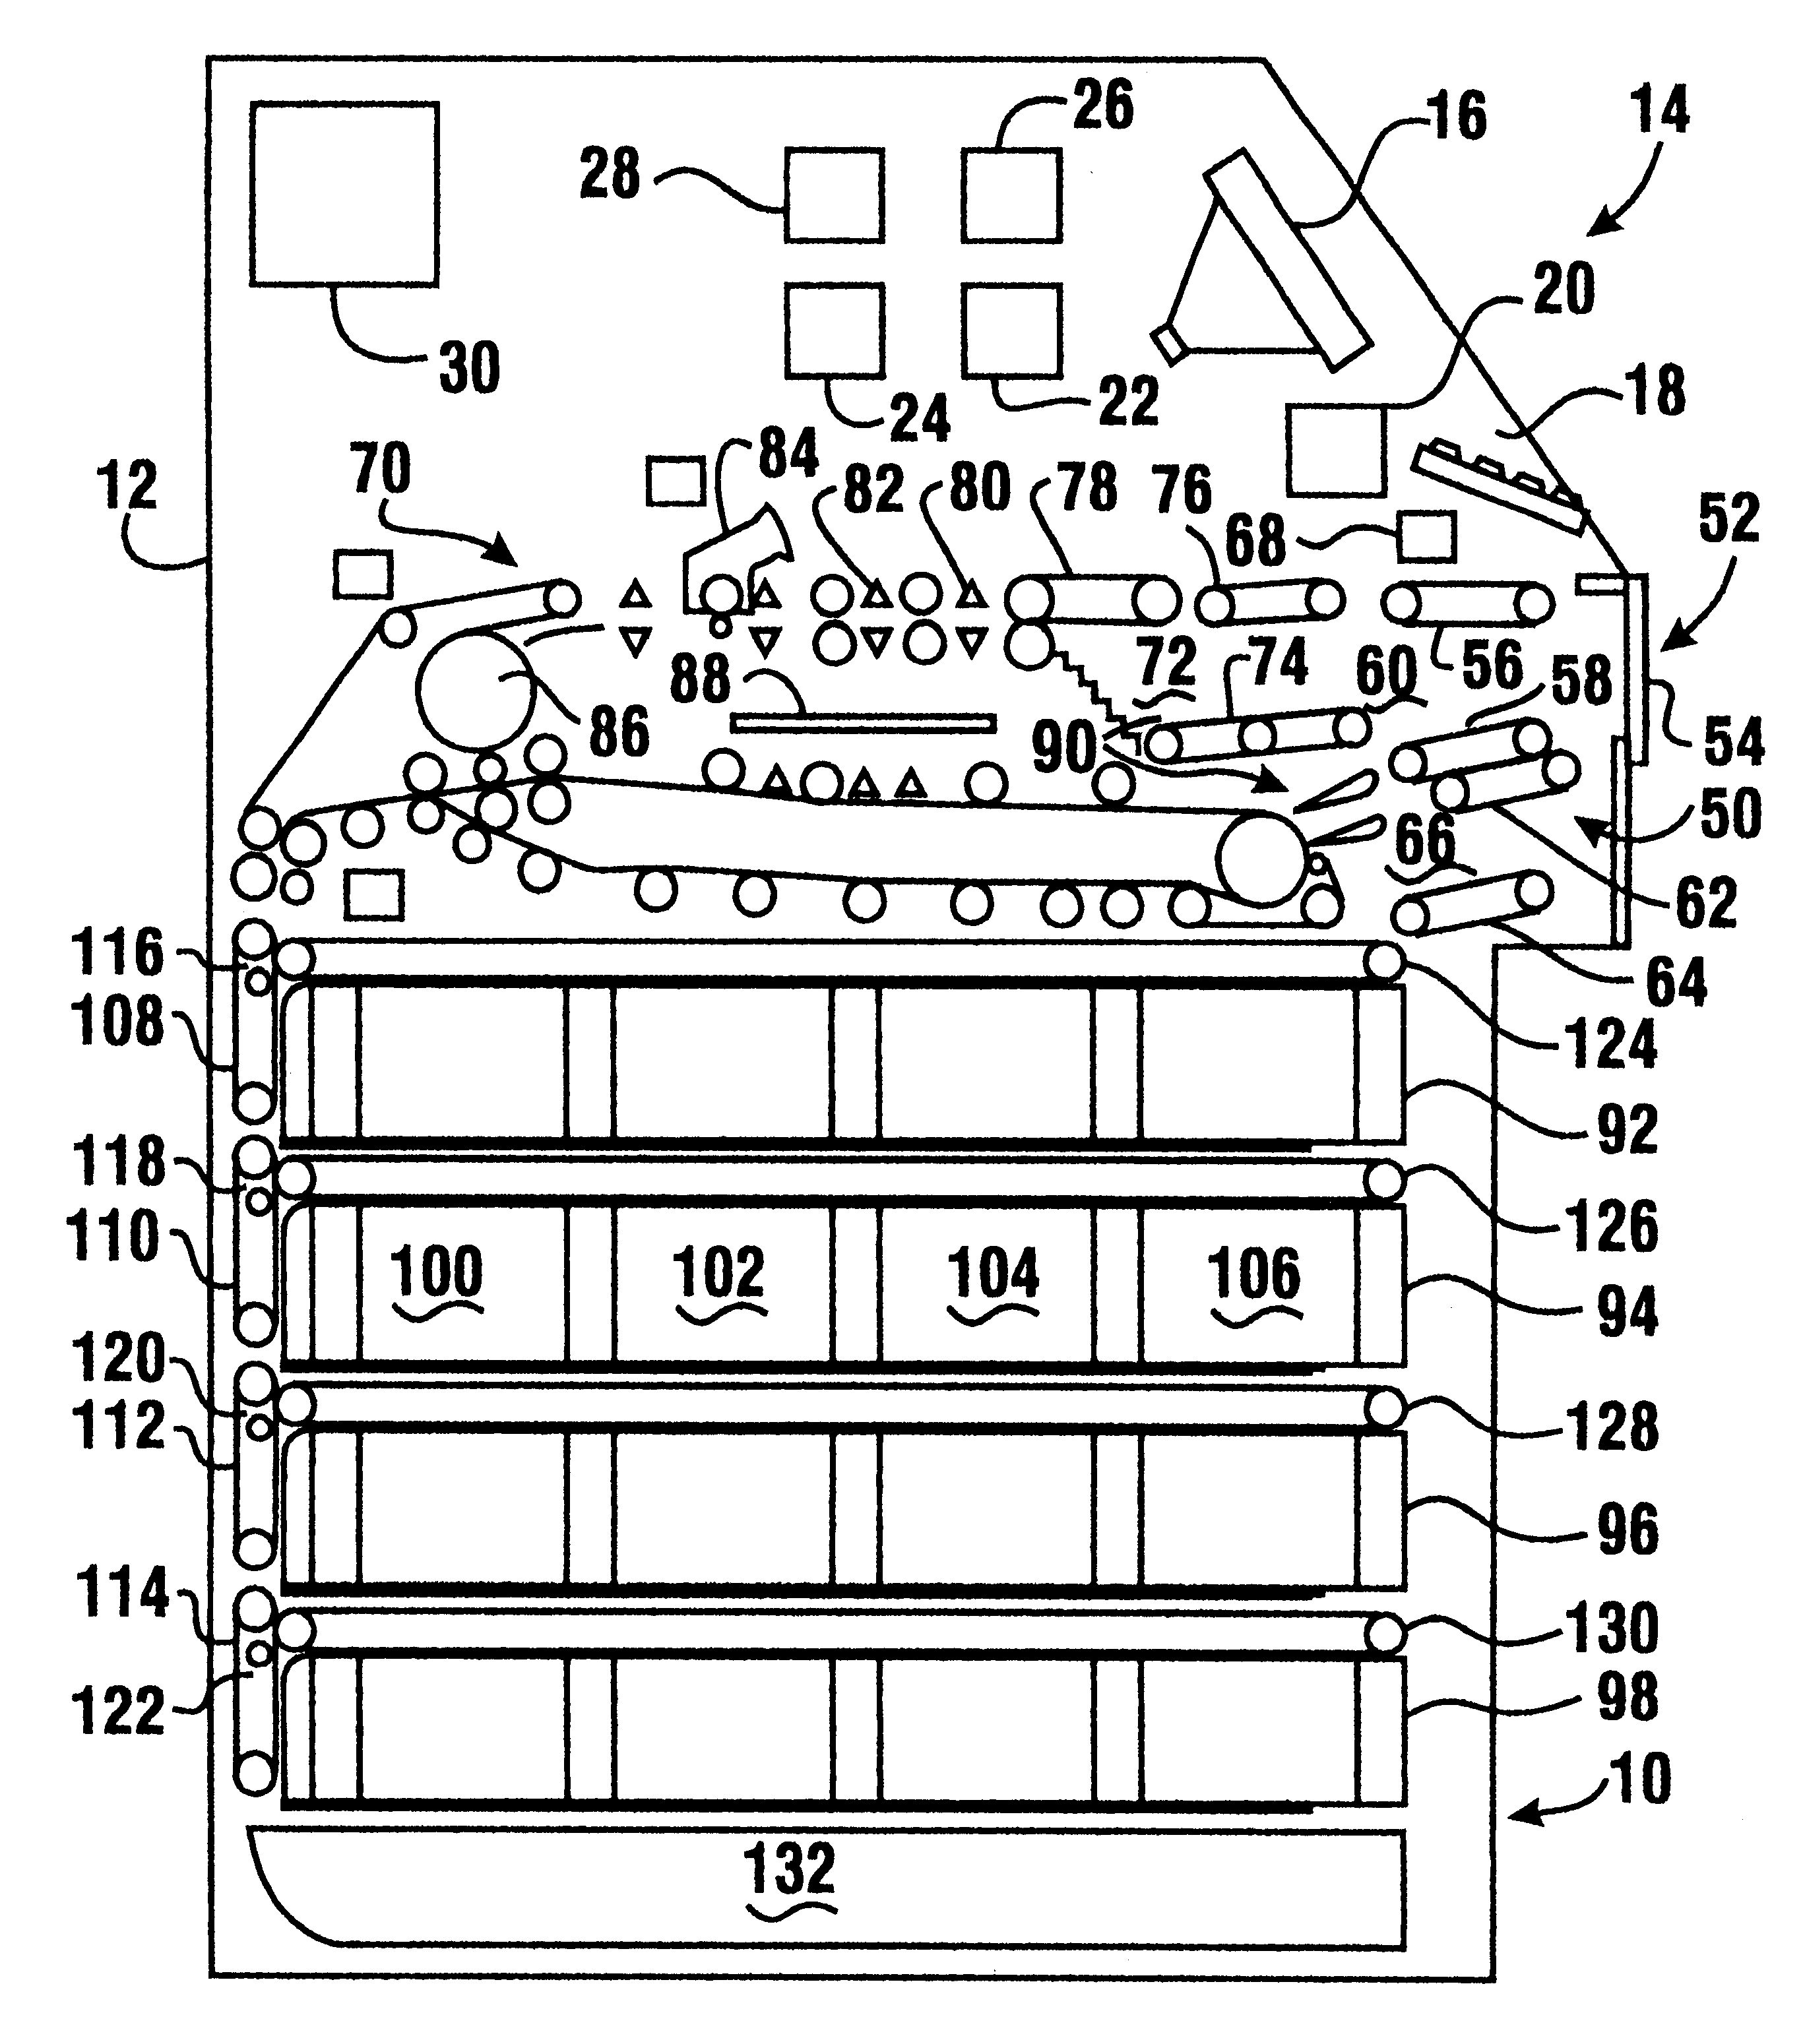 Control system for currency recycling automated banking machine